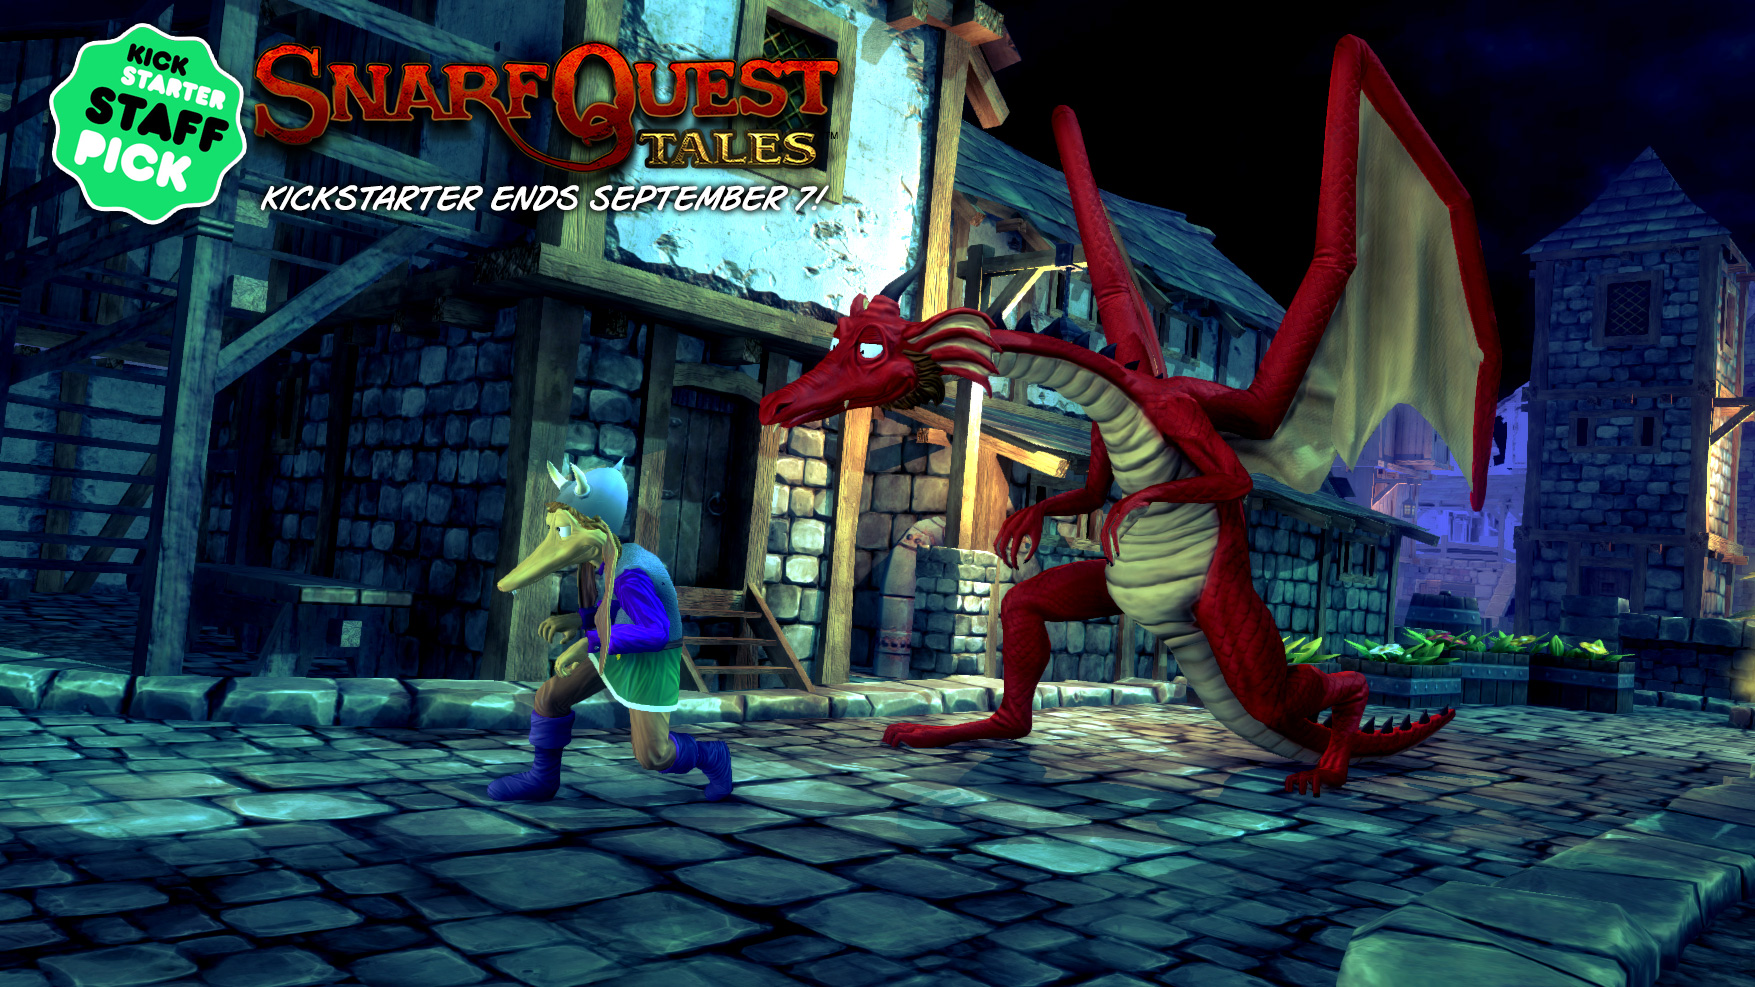 Snarf and Willie the Dragon running though town in SnarfQuest Tales